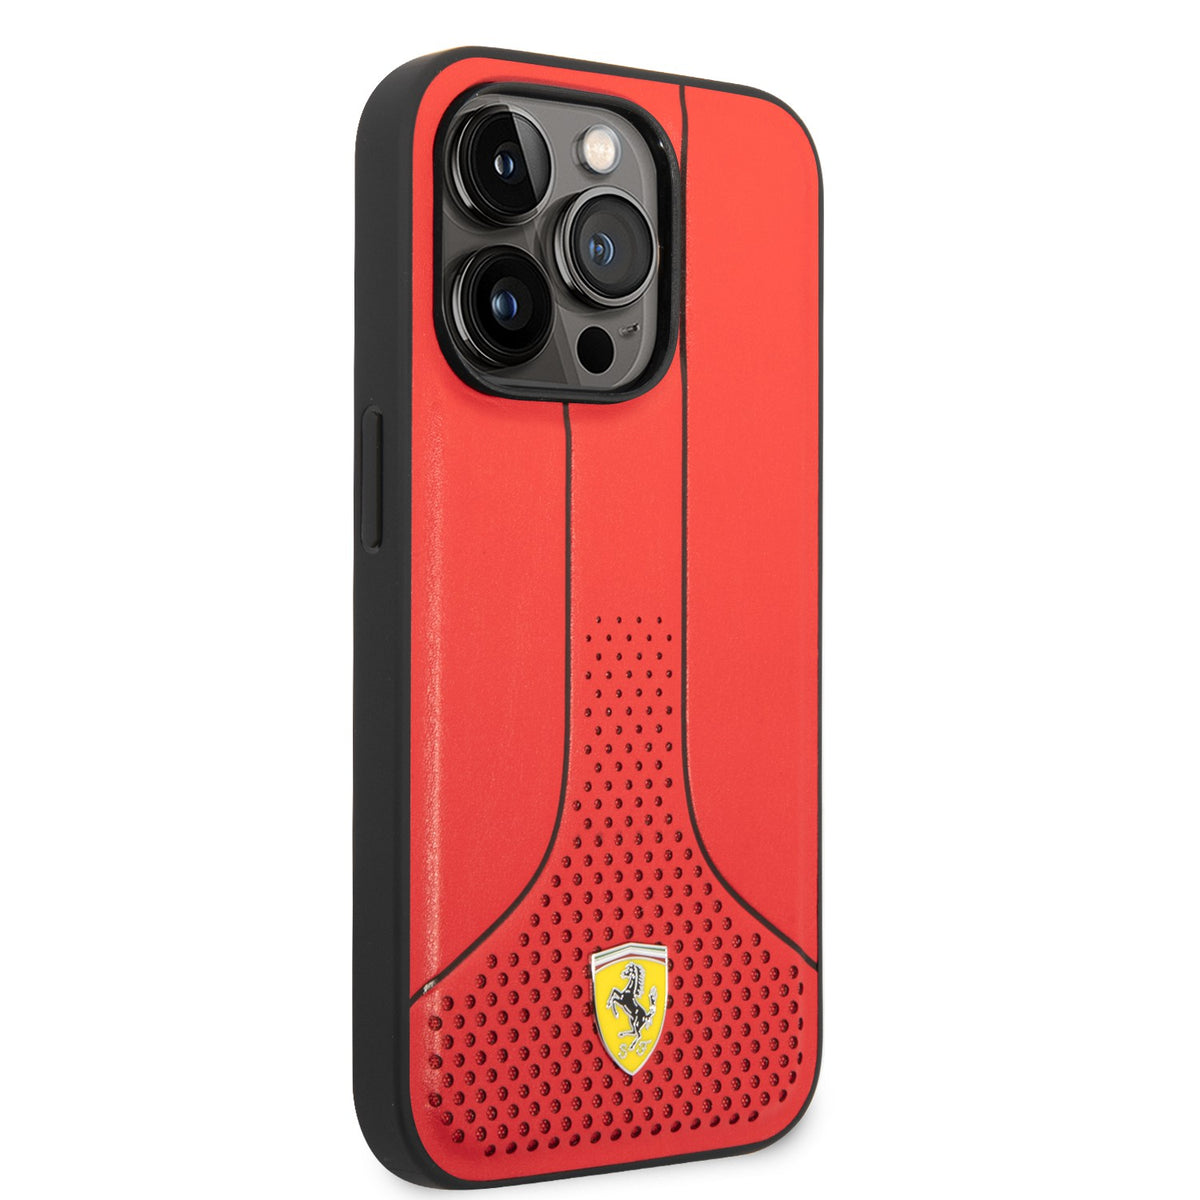 Ferrari PU Leather Smooth And Perforated Case with Yellow Metal Logo Compatible for iPhone 14 Pro, 14 Pro Max (Black/Red)